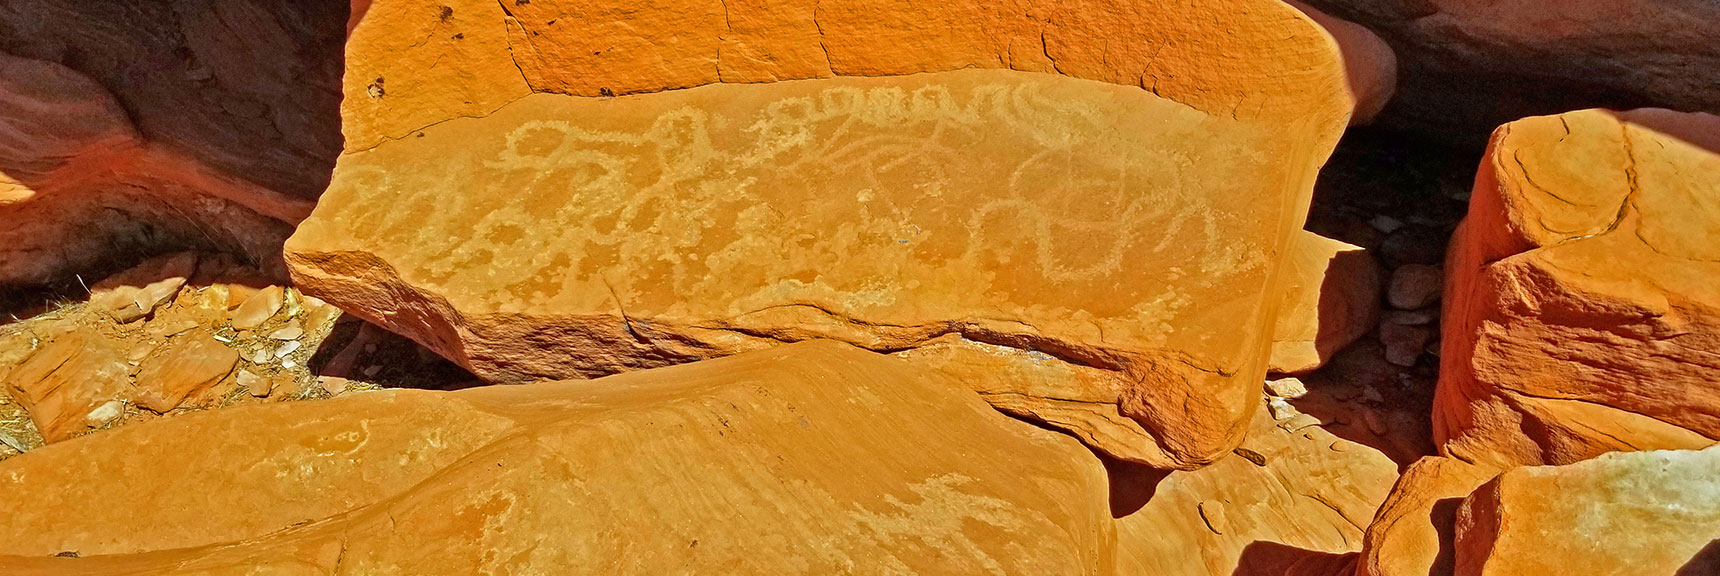 Ancient Petroglyph Drawings at the Cooking Area | Little Red Rock Las Vegas, Nevada, Near La Madre Mountains Wilderness